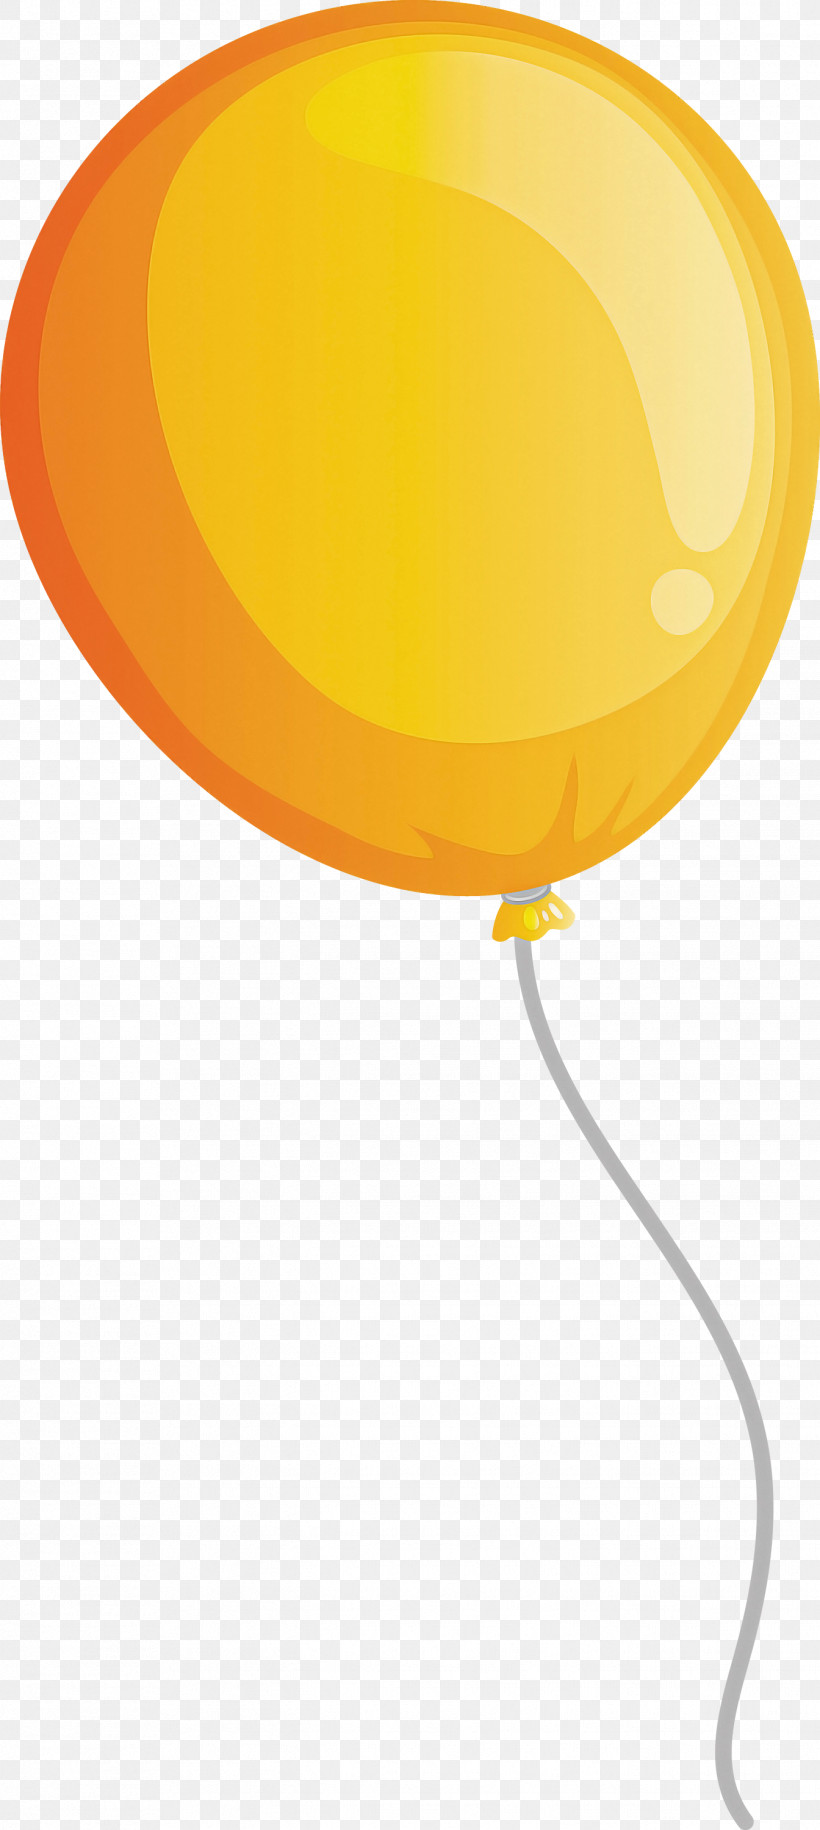 Balloon, PNG, 1344x3000px, Balloon, Oval, Yellow Download Free